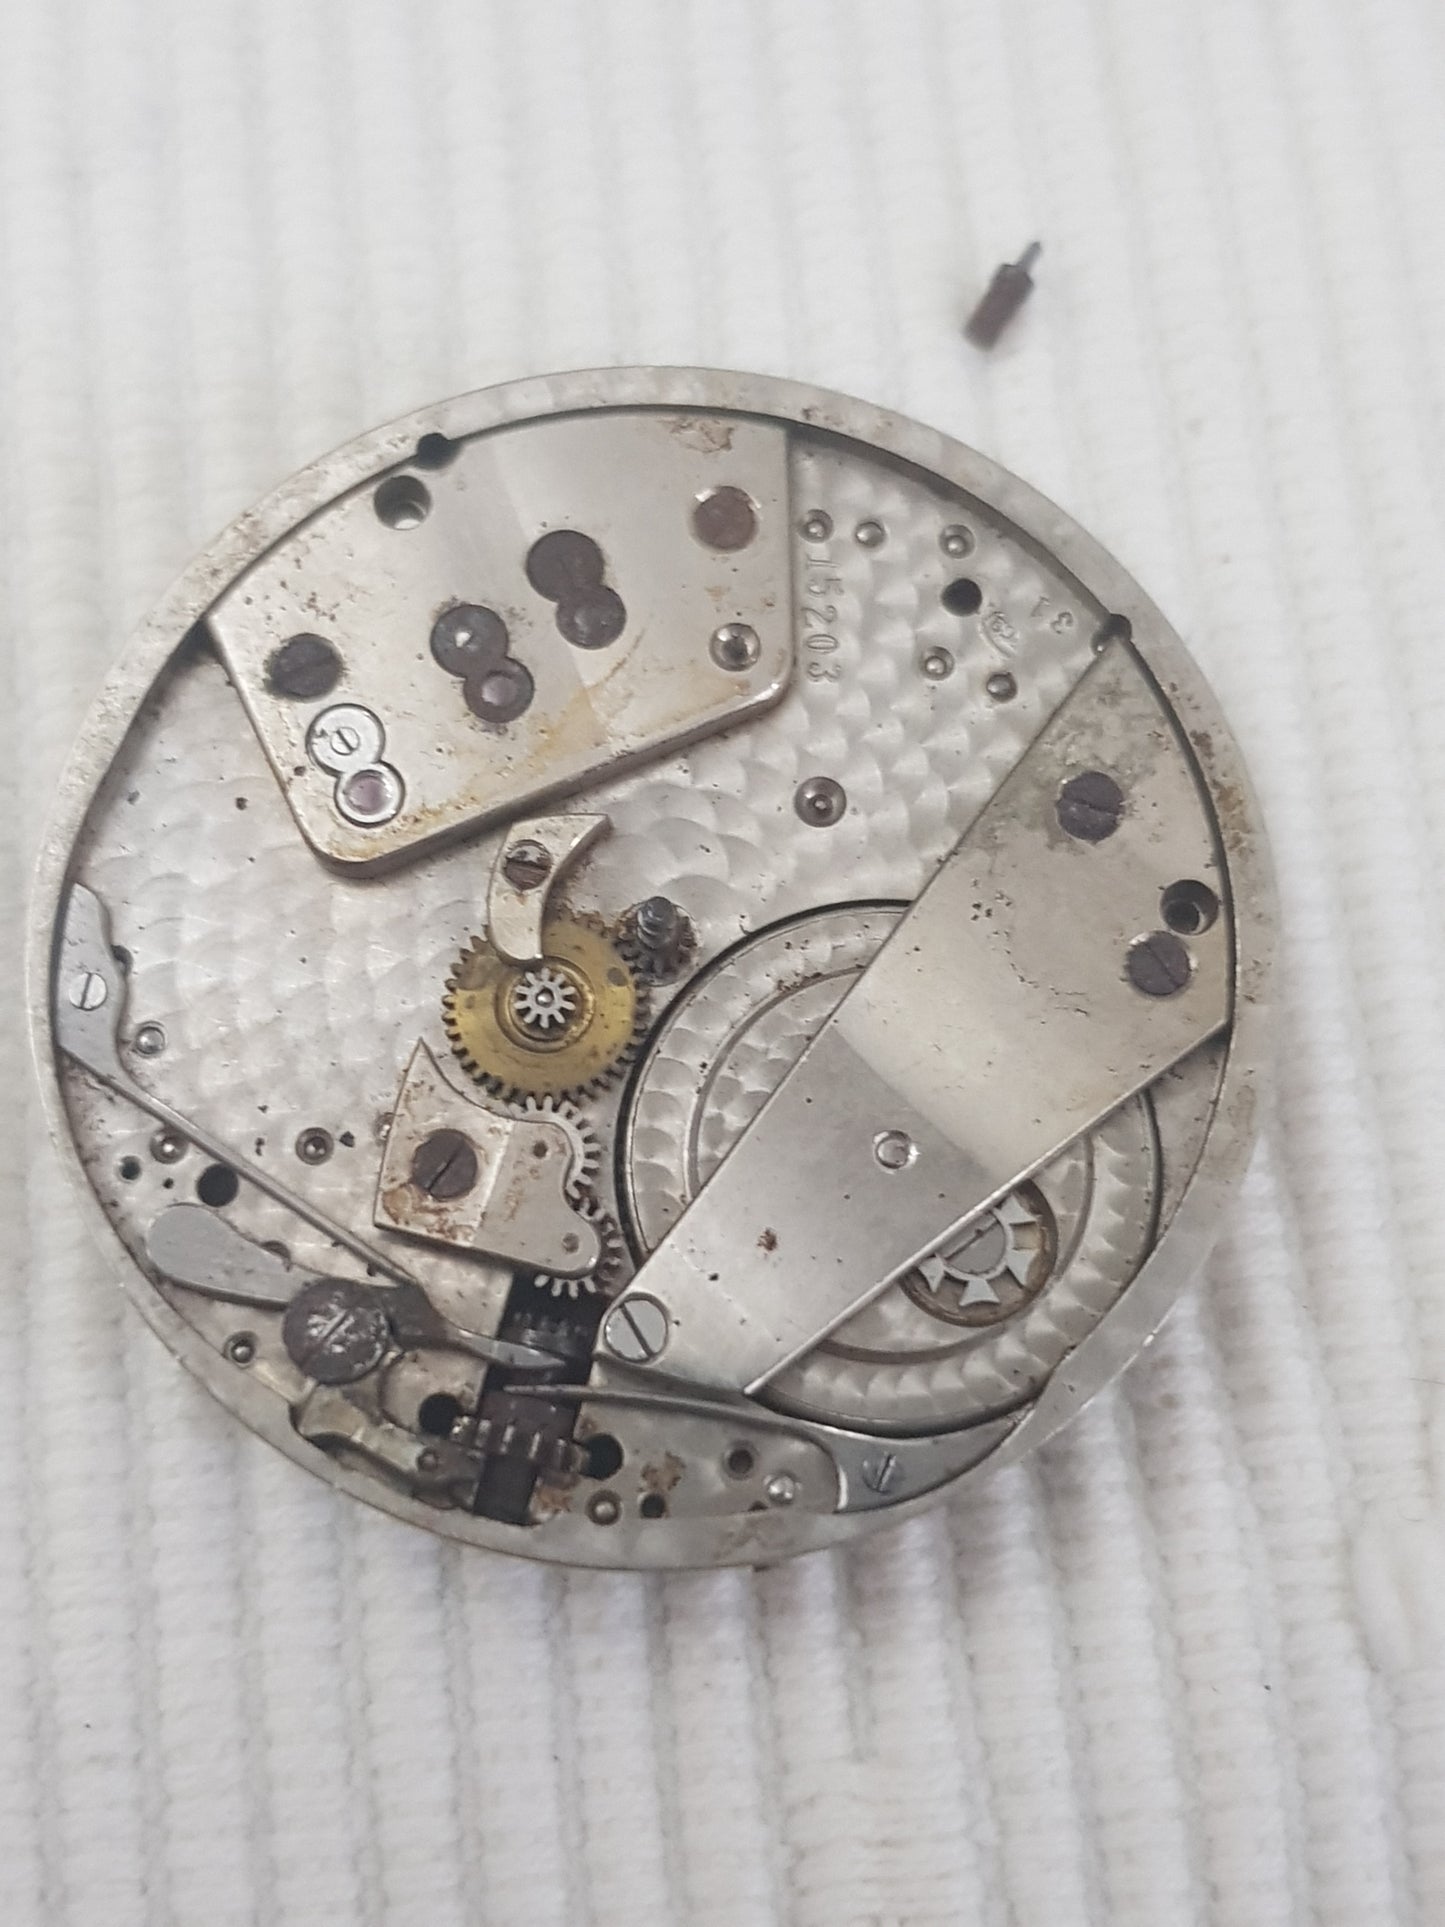 PATEK PHILIPPE FOR "BAILEY, BANKS & BIDDLE" POCKET WATCH MOVEMENT